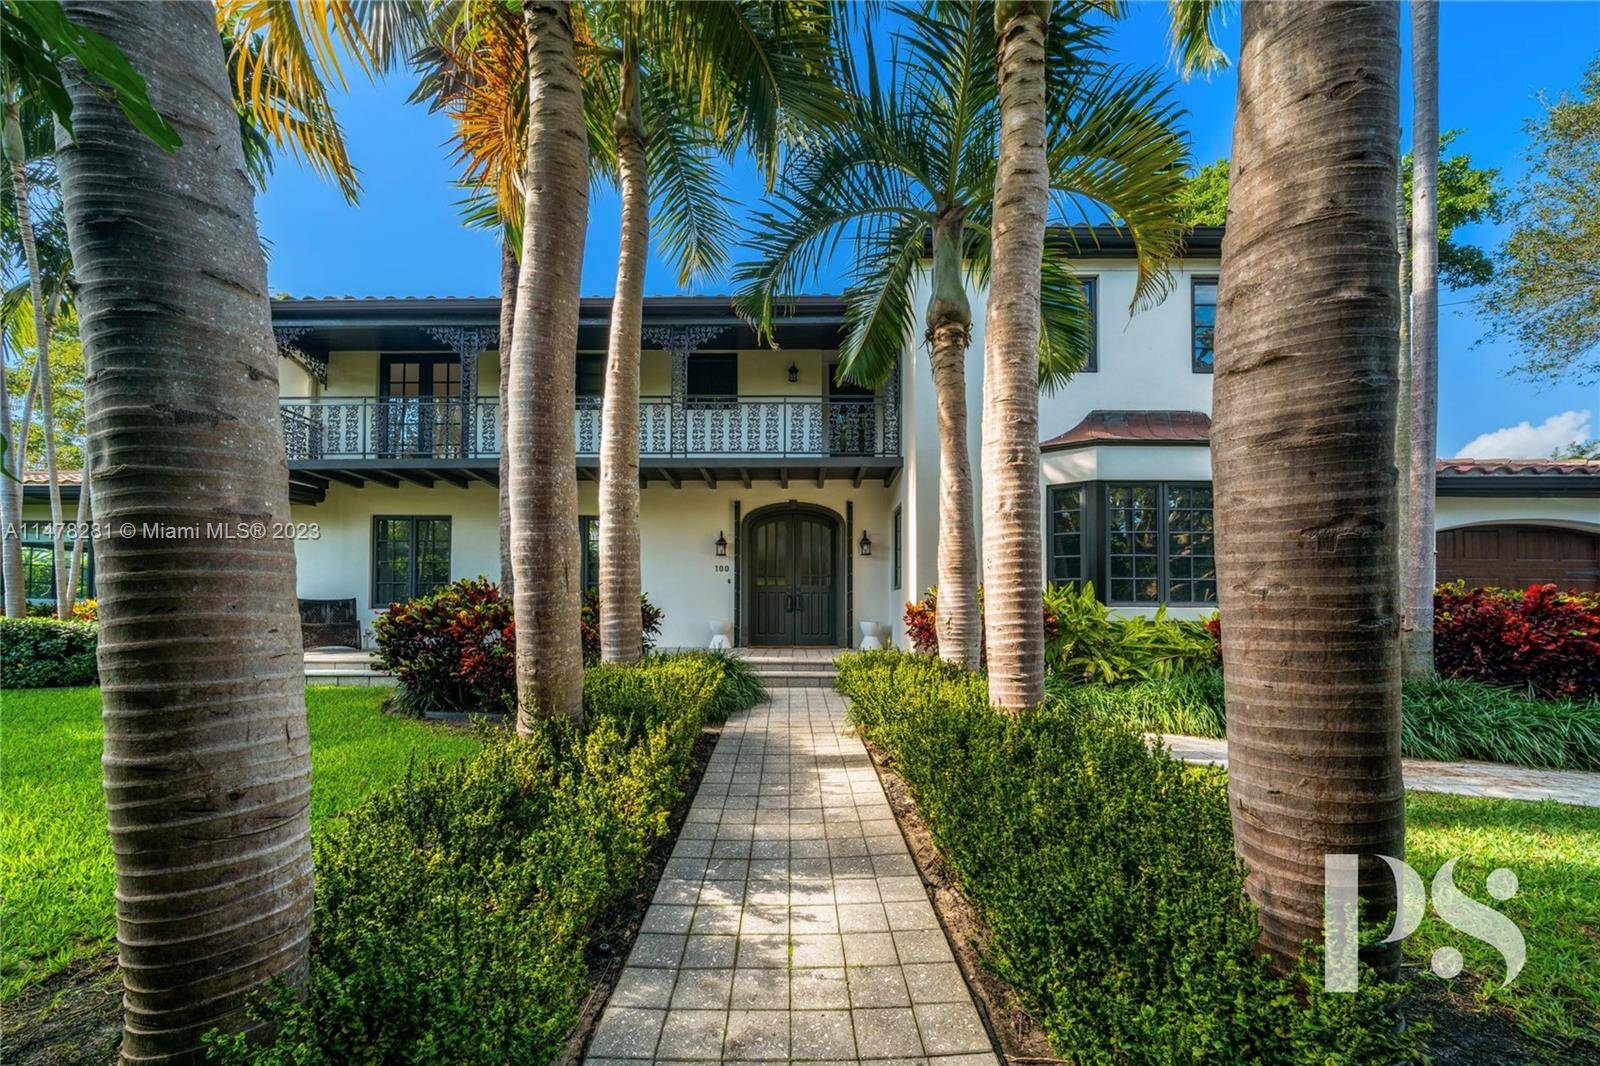 Welcome to the heart of the Venetian Islands this fully renovated 4 bedroom 4.